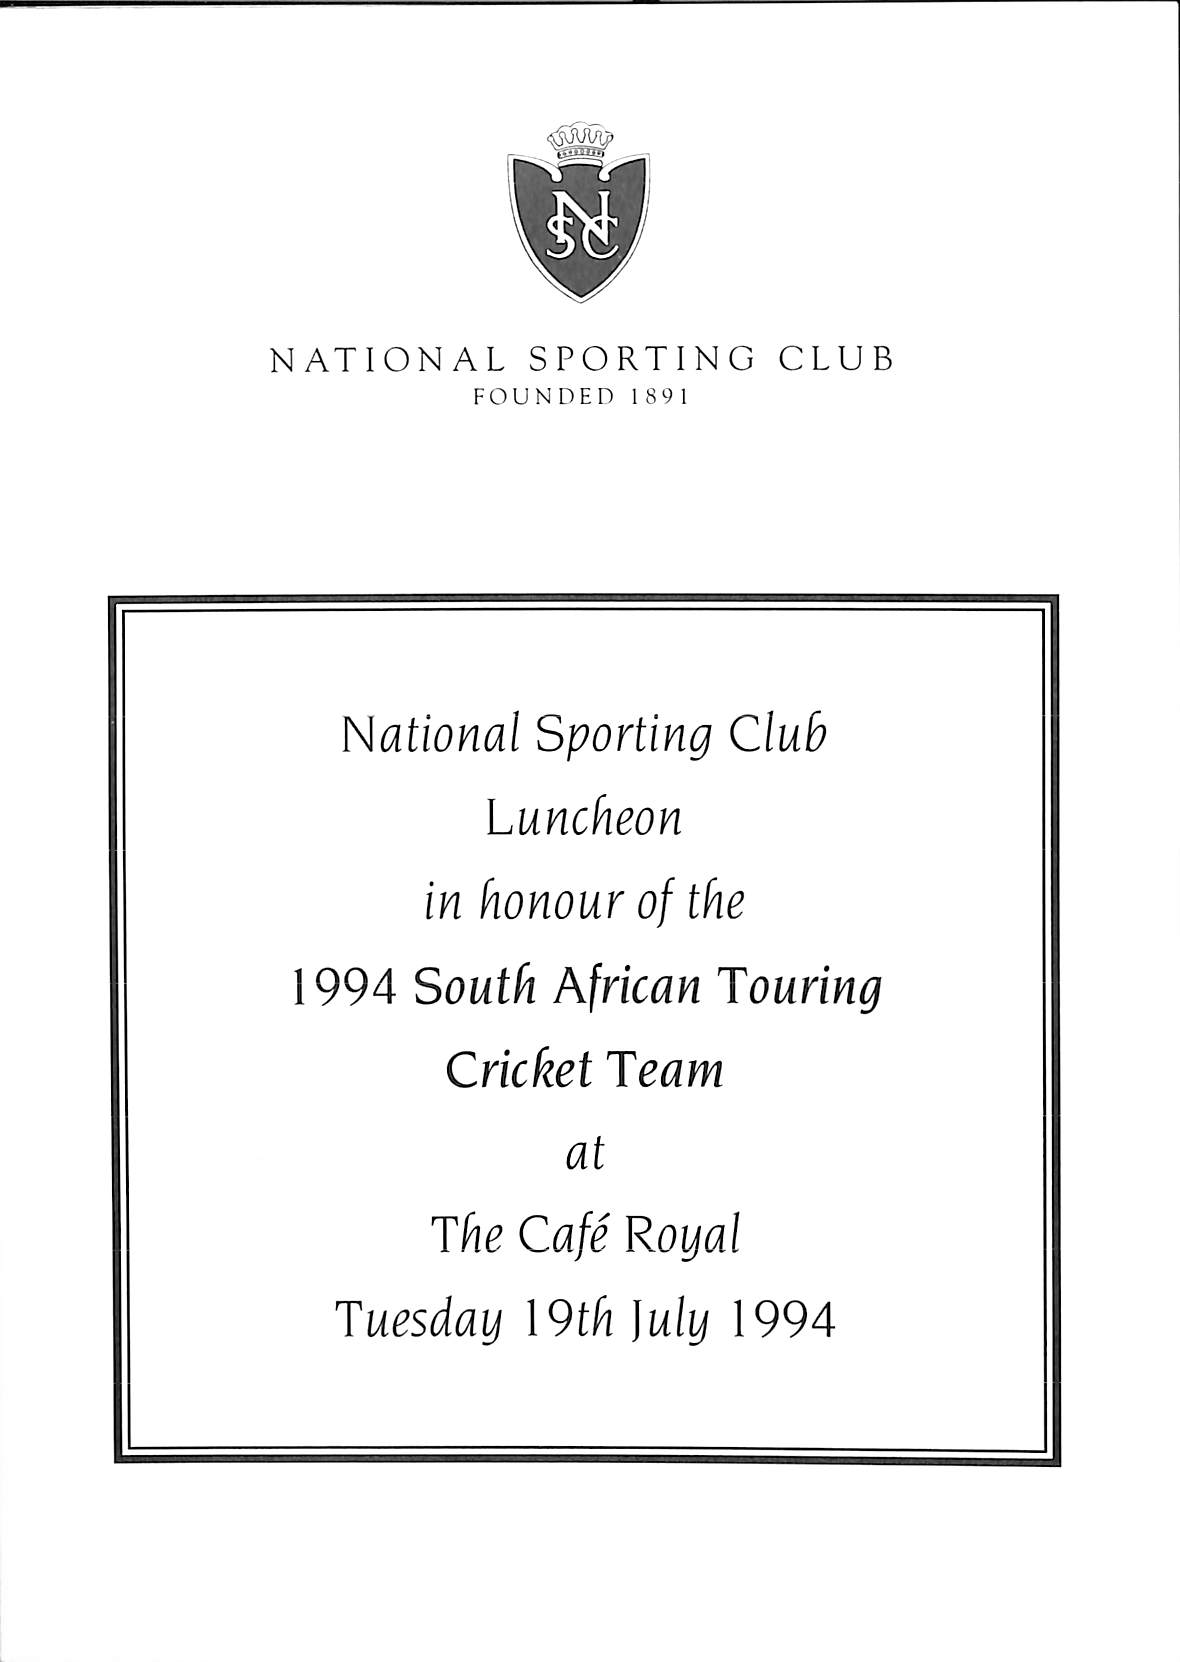 South Africa - Tours to England. 1904-2003 Ephemera including scarce 1904 programme of the - Image 3 of 3